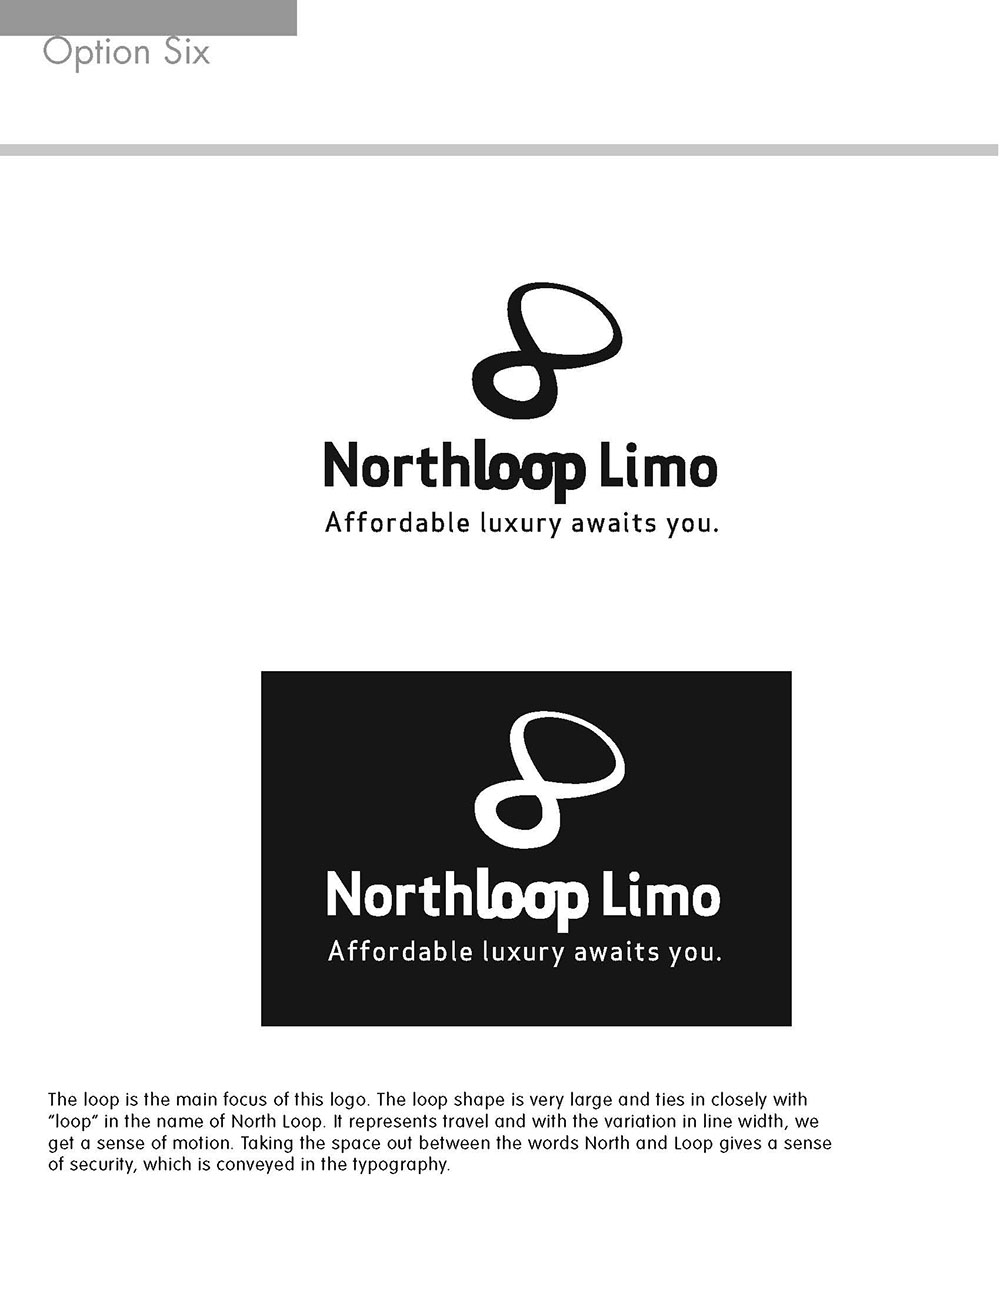 North Loop Limo Black and White Logo Concept